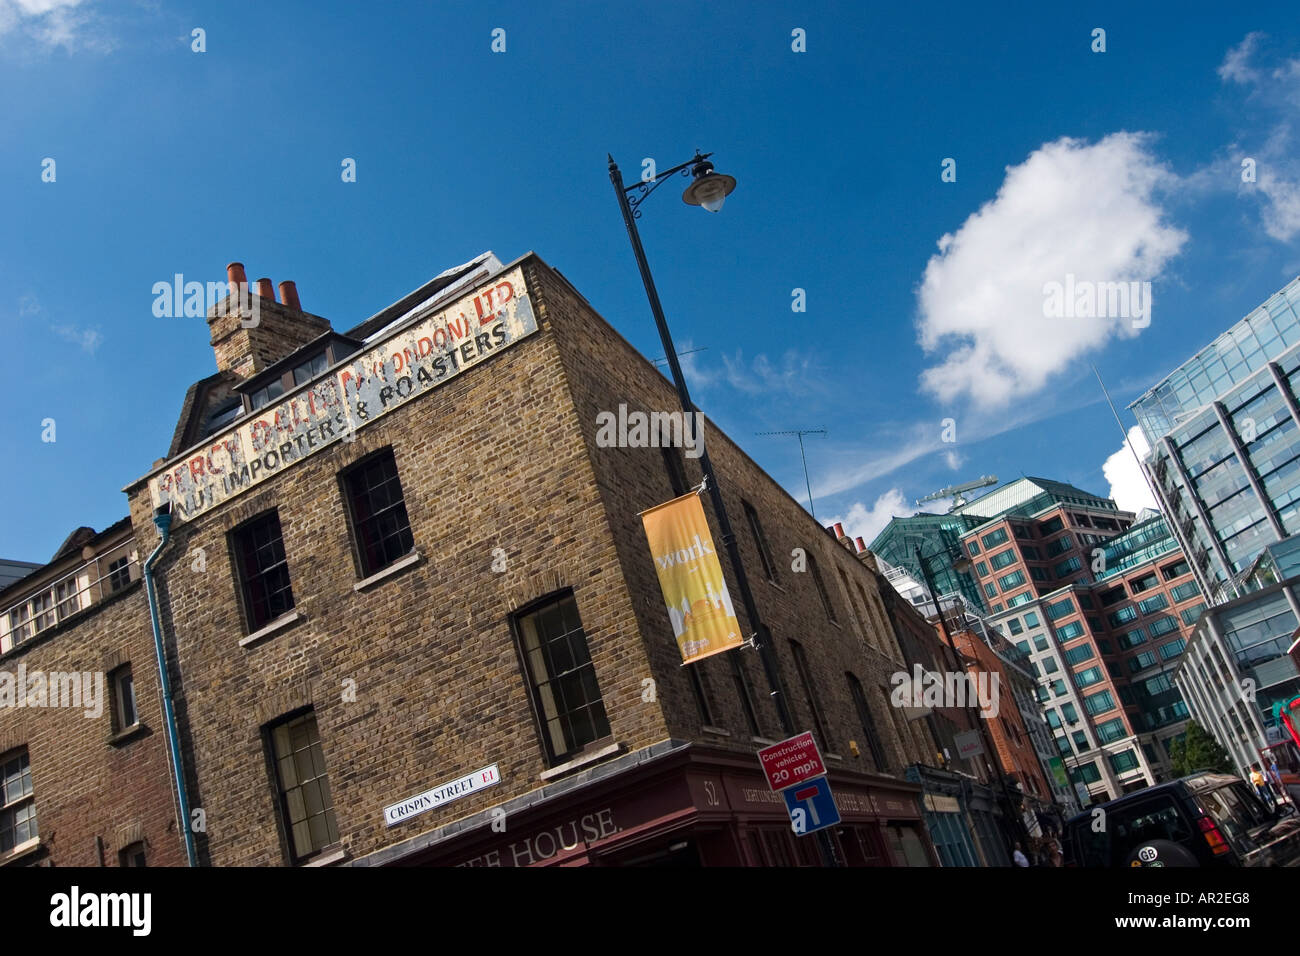 Old meets new Brushfield Street London Old East London facade against backdrop of modern architecture Stock Photo